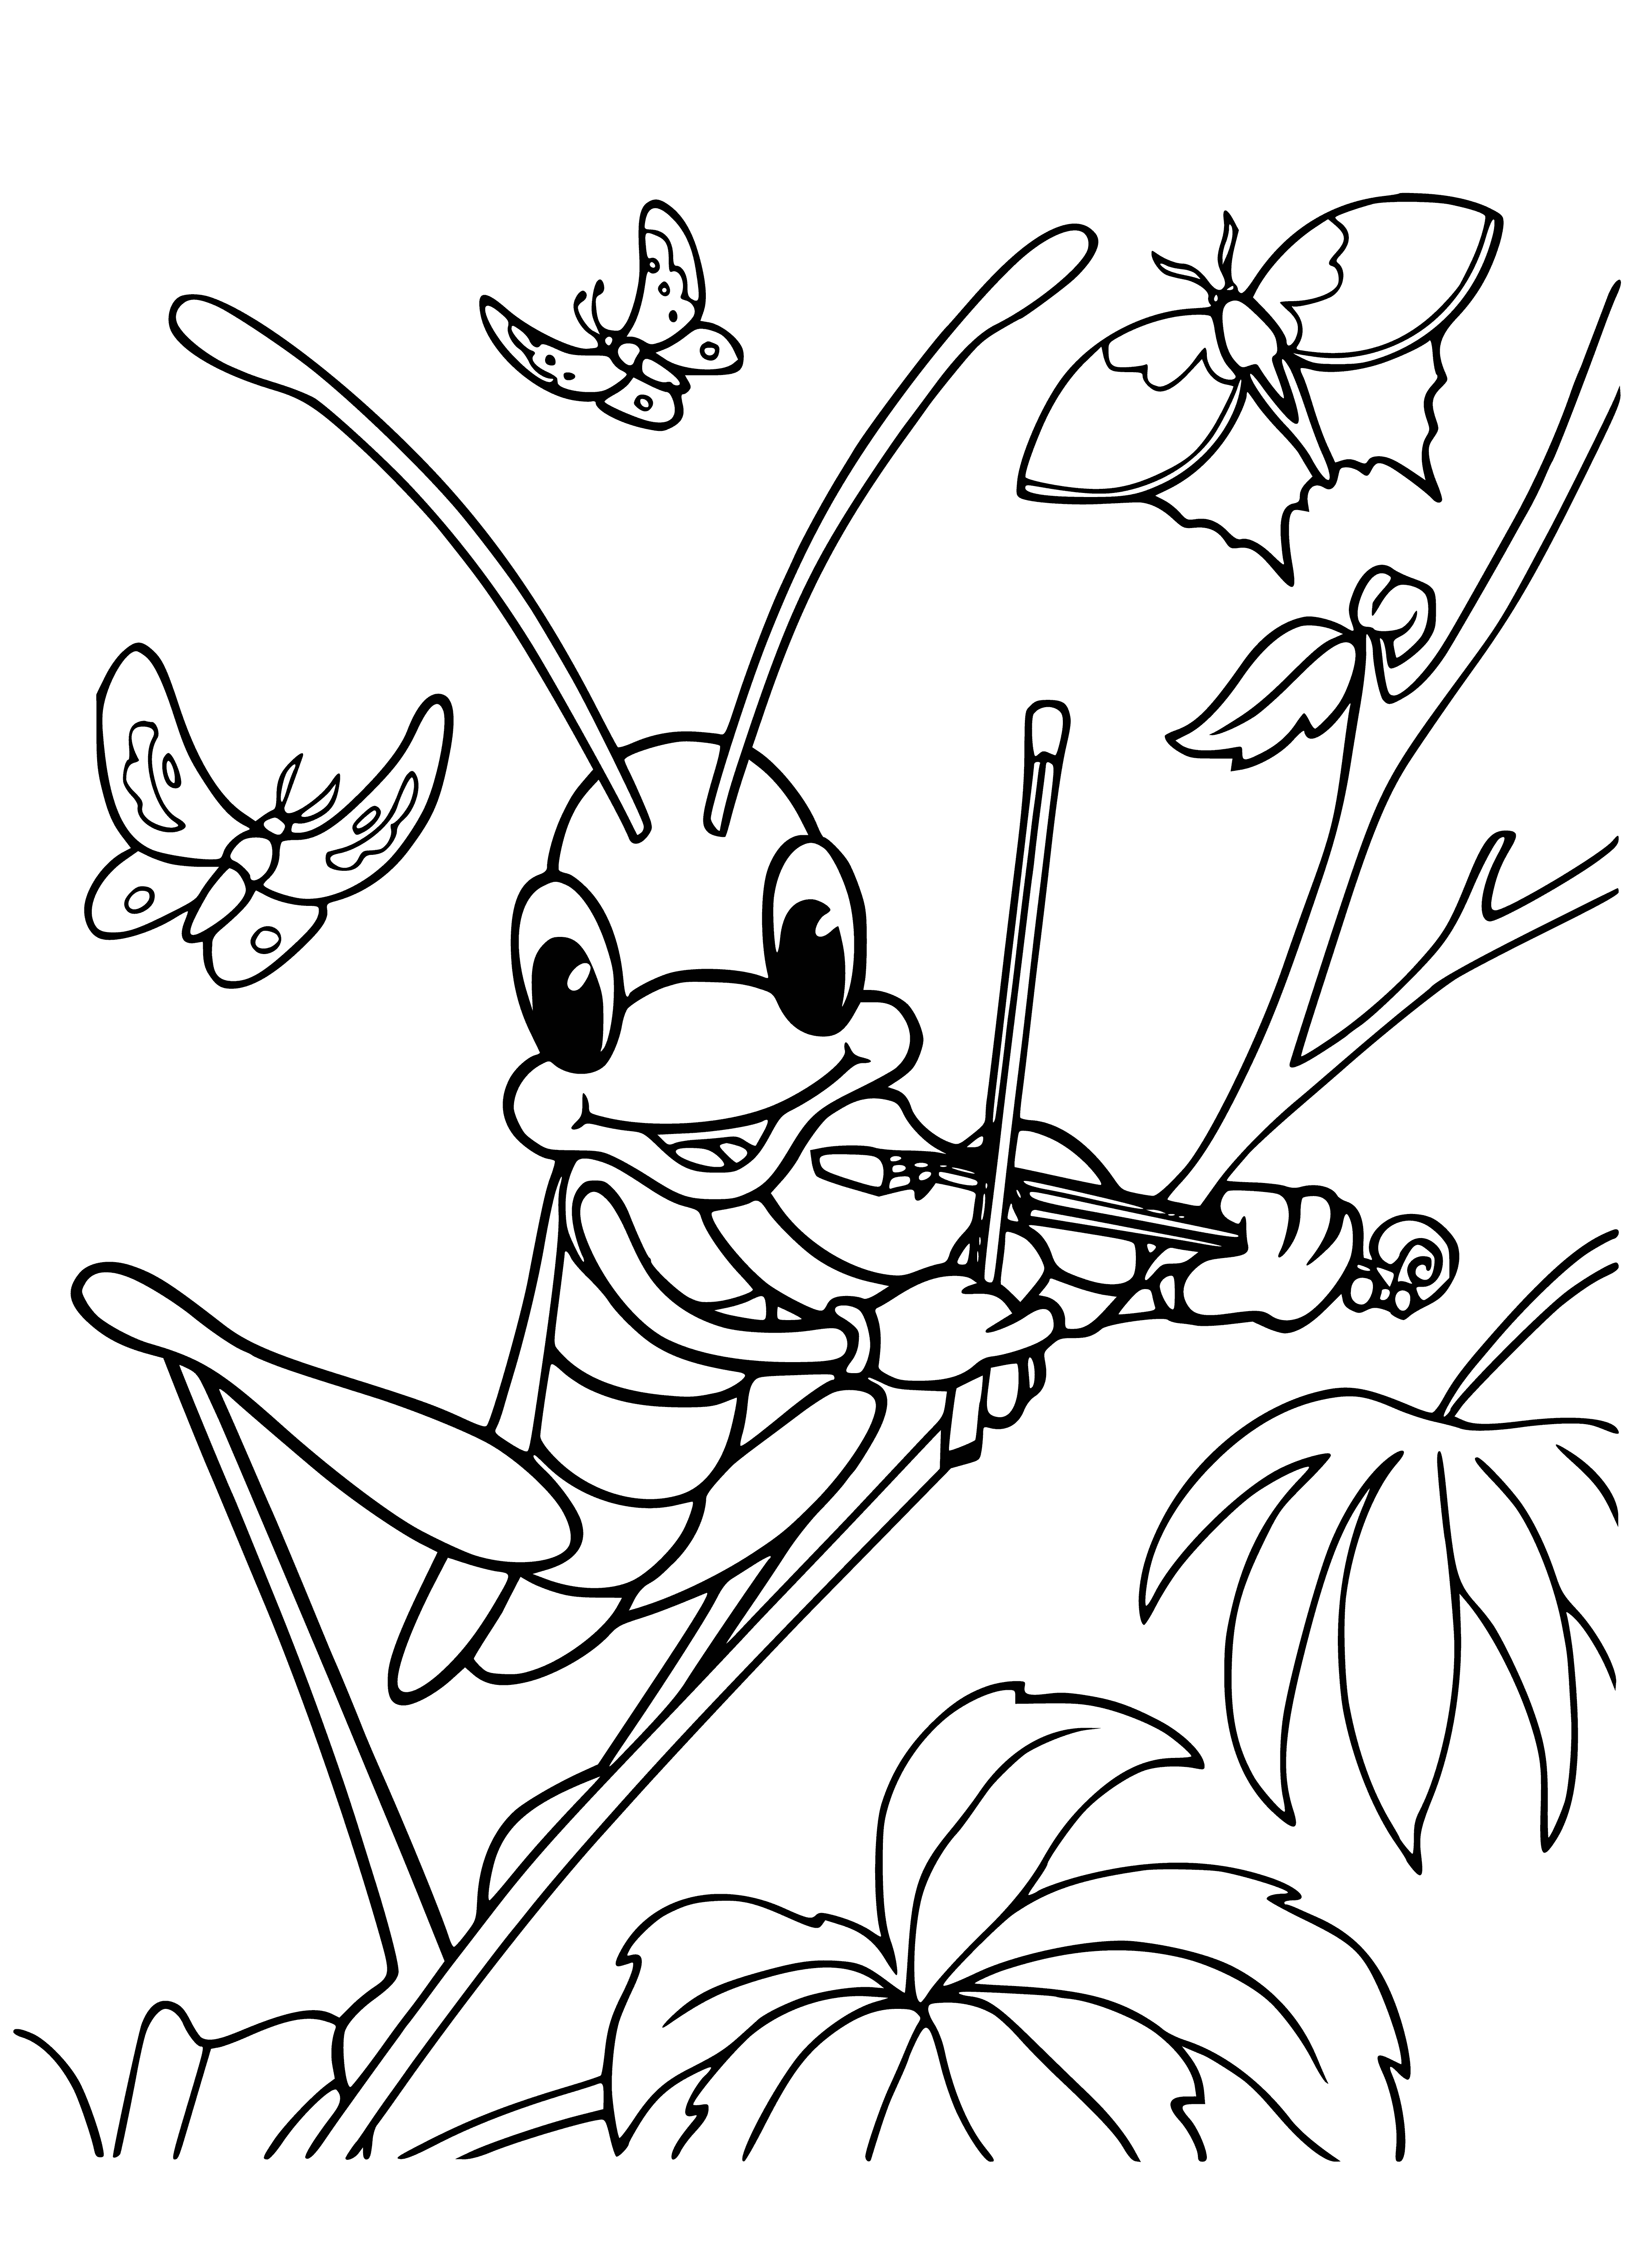 coloring page: Grasshopper plays violin; Little Raccoon delightedly listens with paws on the ground.